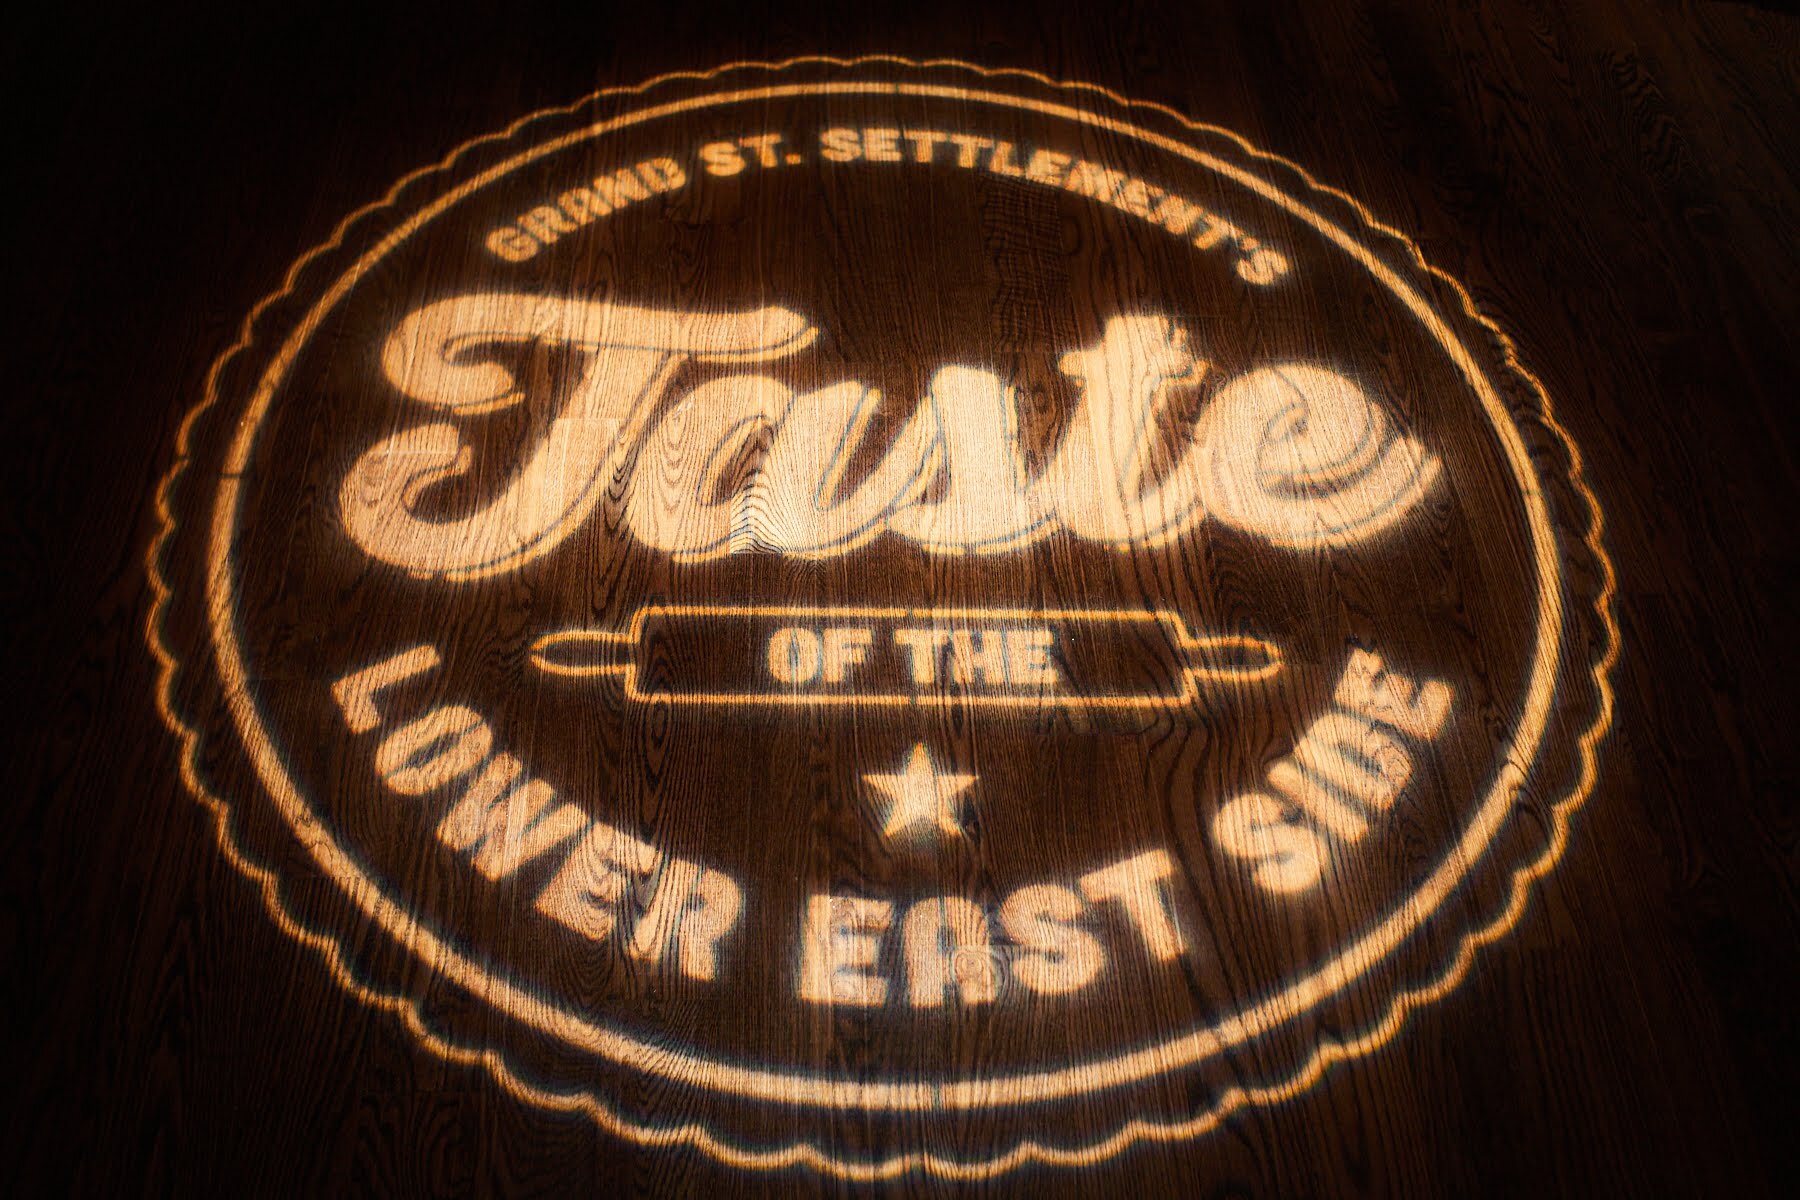 19th Annual Taste of the Lower East Side